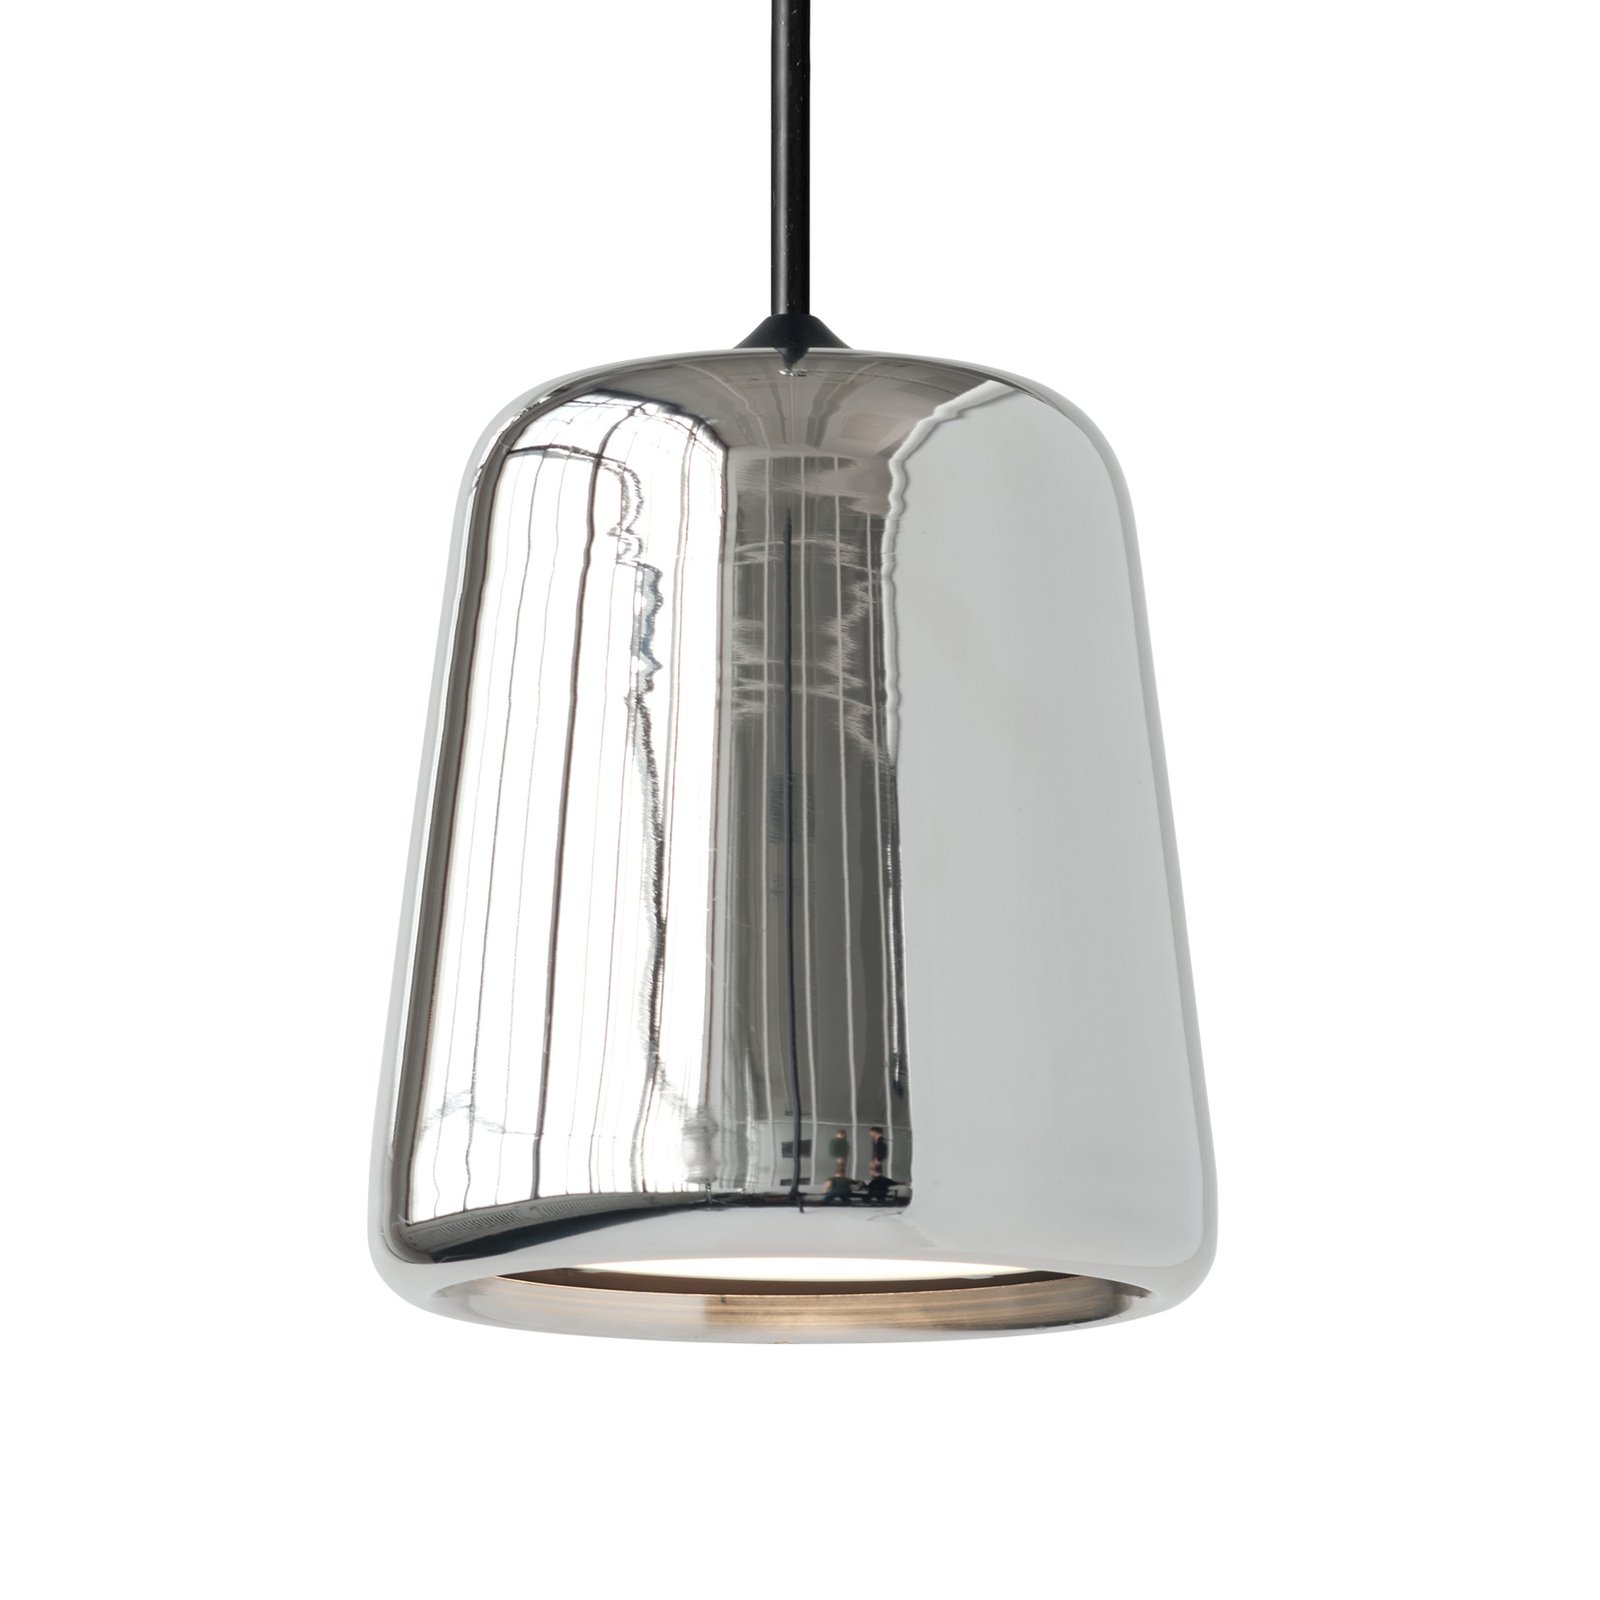 New Works Material New Edition hanglamp staal